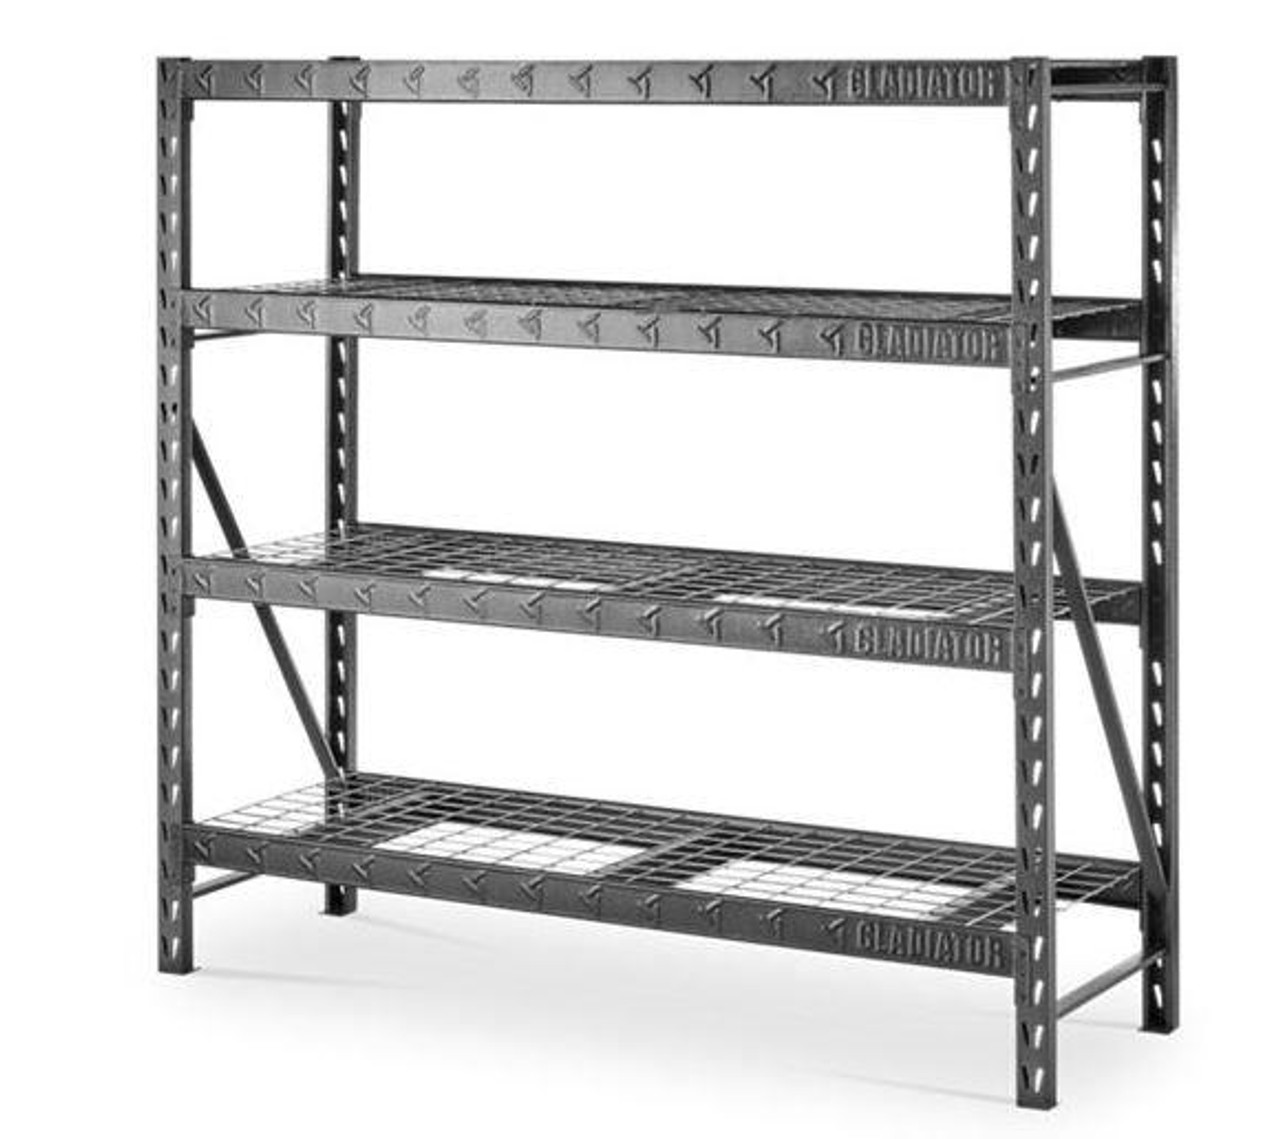 https://cdn11.bigcommerce.com/s-hbi7s/images/stencil/1280x1280/products/2328/19833/gladiator-77-wide-heavy-duty-rack-with-four-24-deep-shelves__49371.1660775604.jpg?c=2